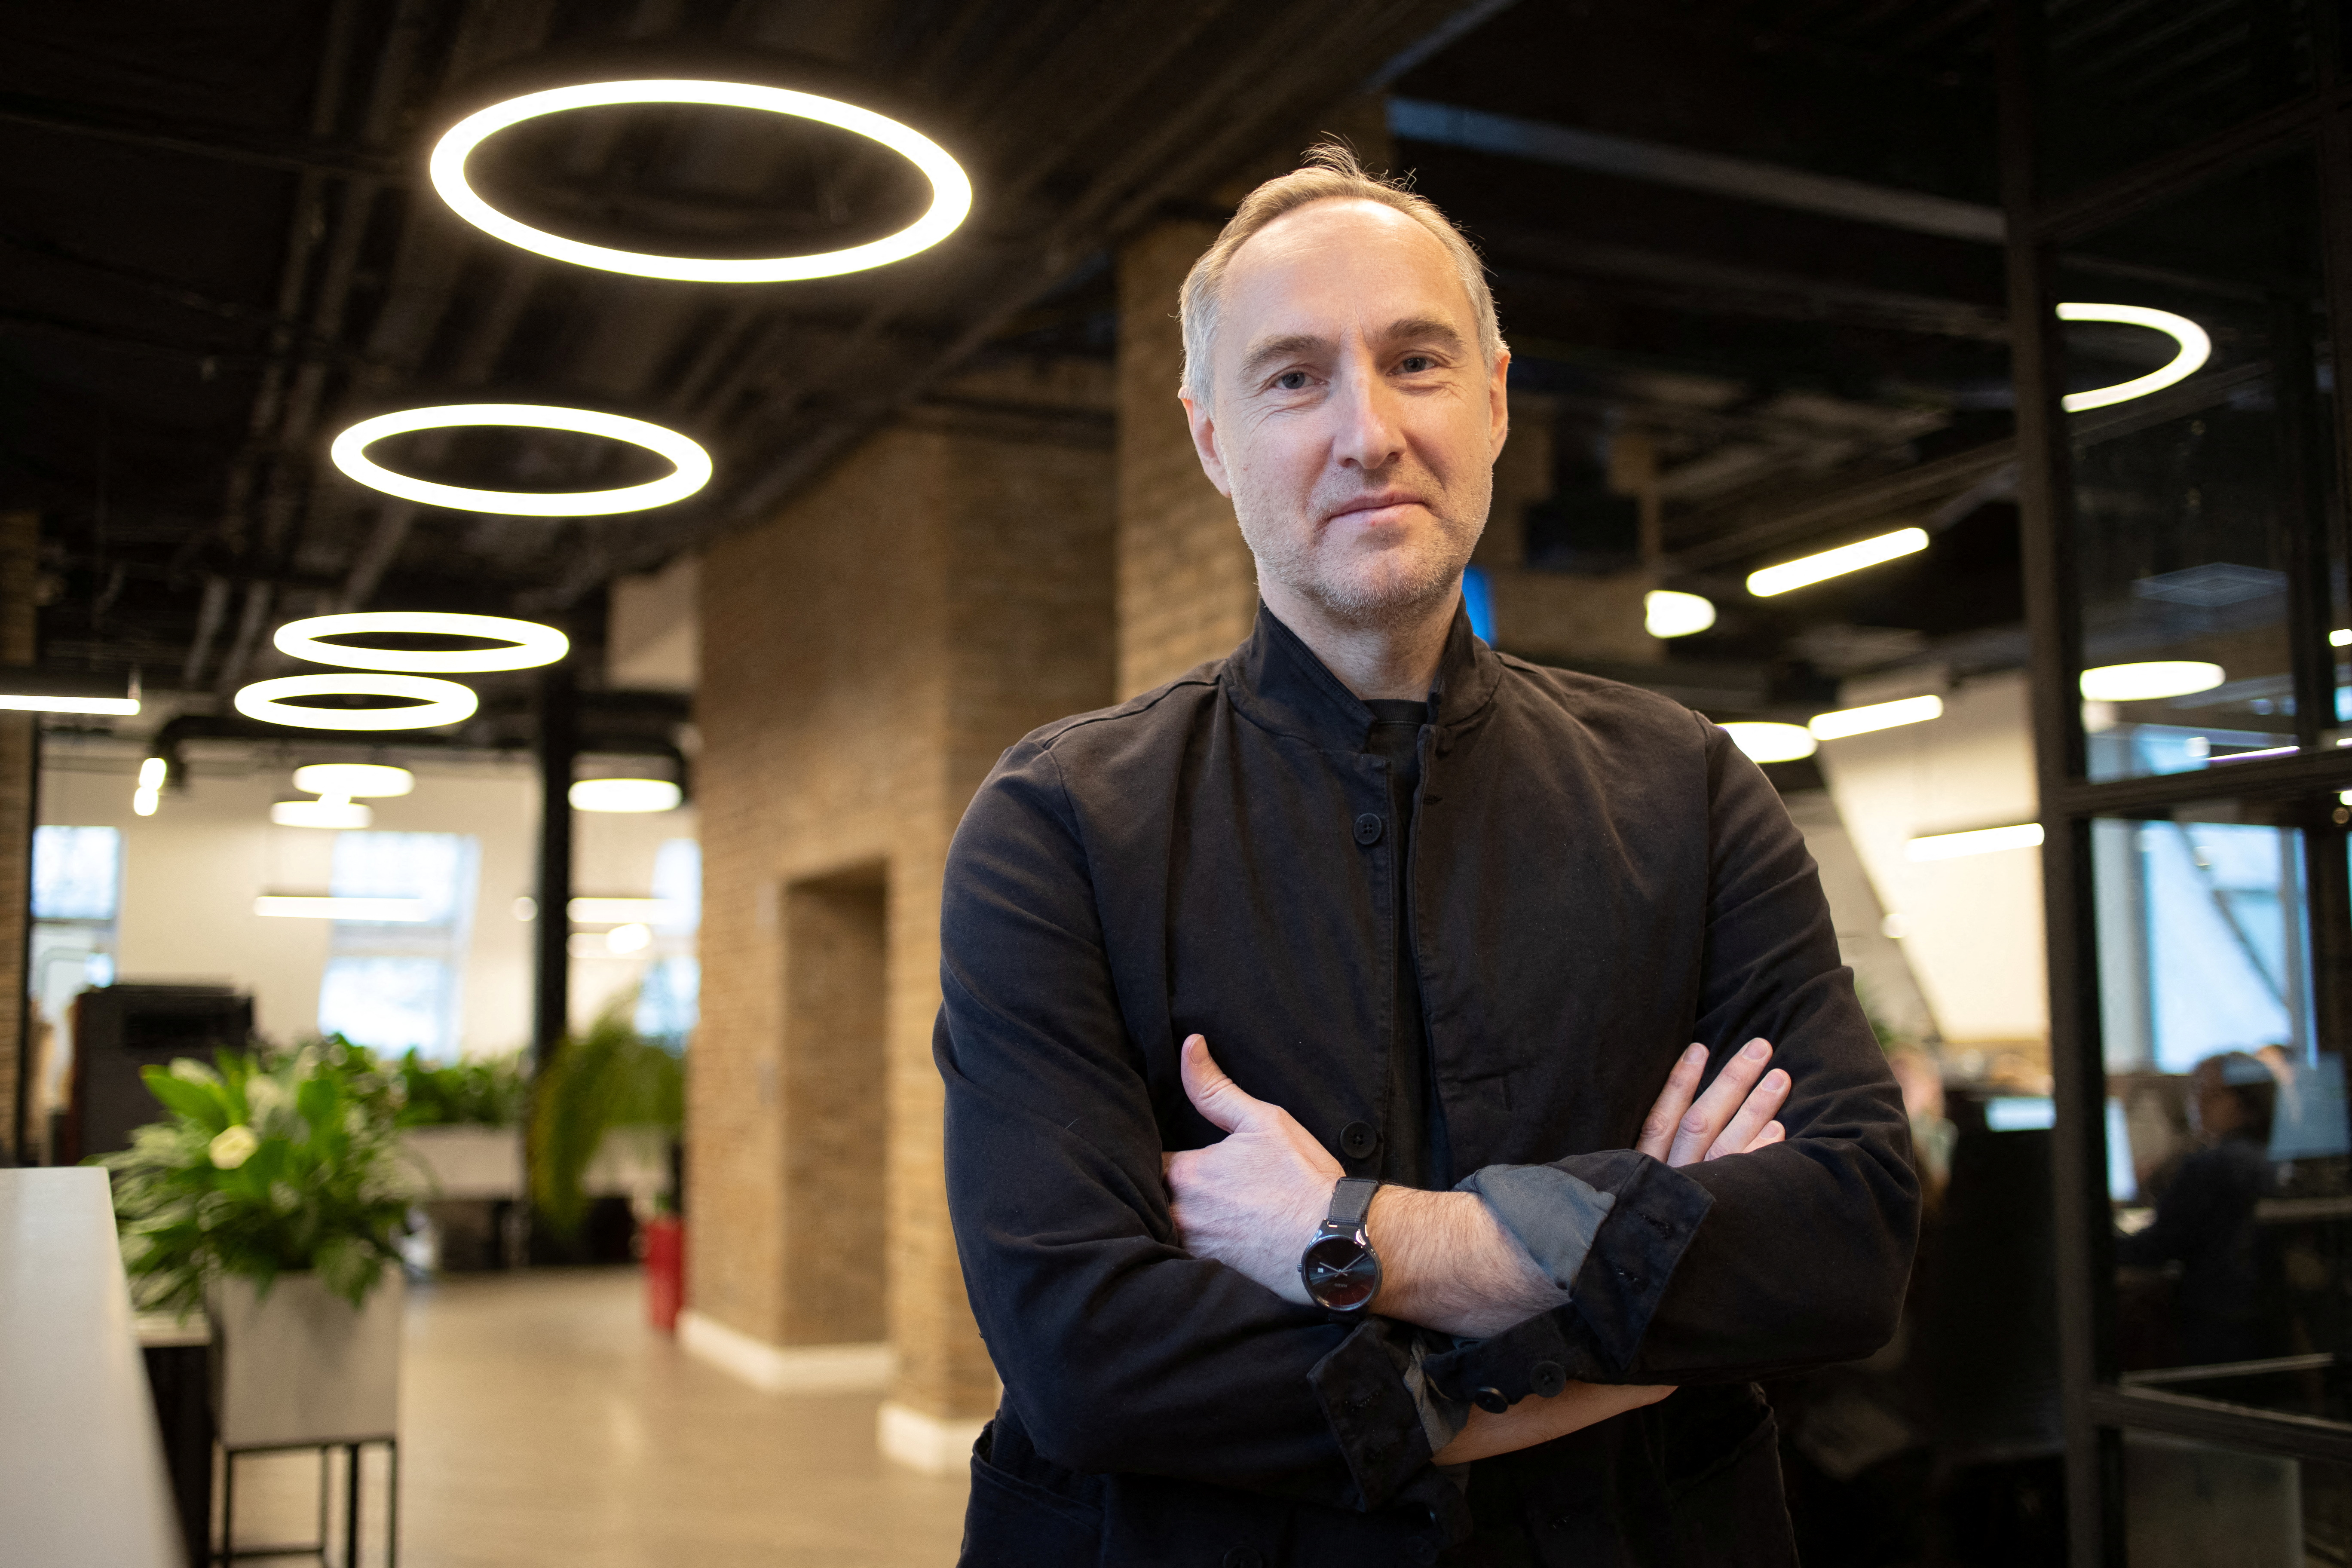 Mikhail Urzhumtsev, CEO of Melon Fashion Group, poses for a photo at the company's headquarters in Saint Petersburg